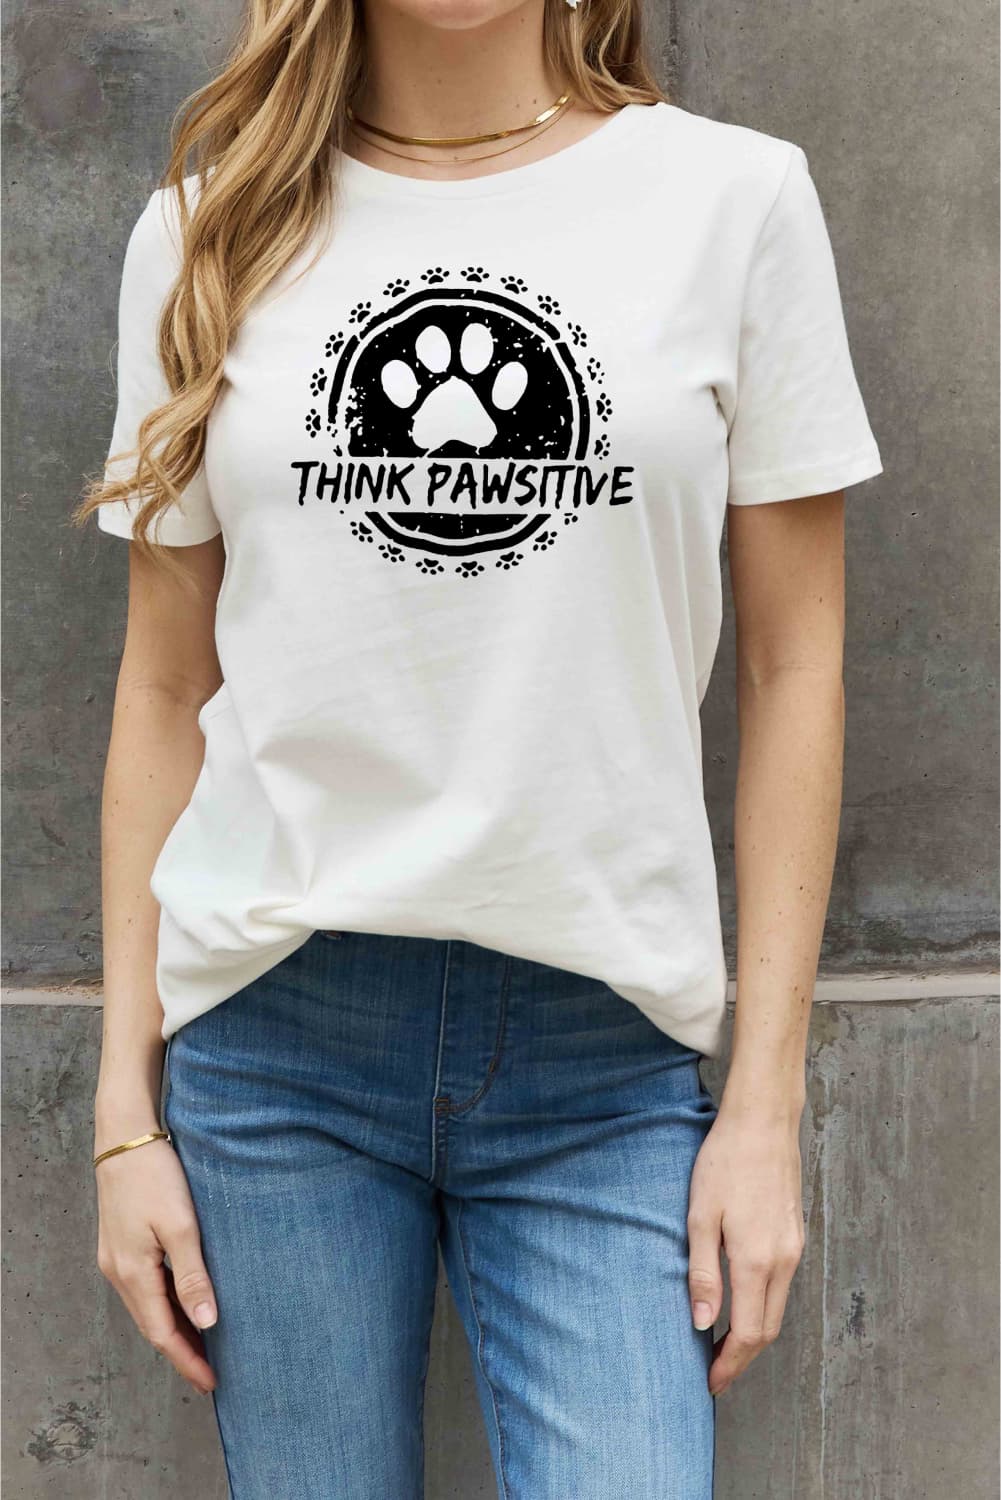 Simply Love Full Size THINK PAWSITIVE Graphic Cotton Tee